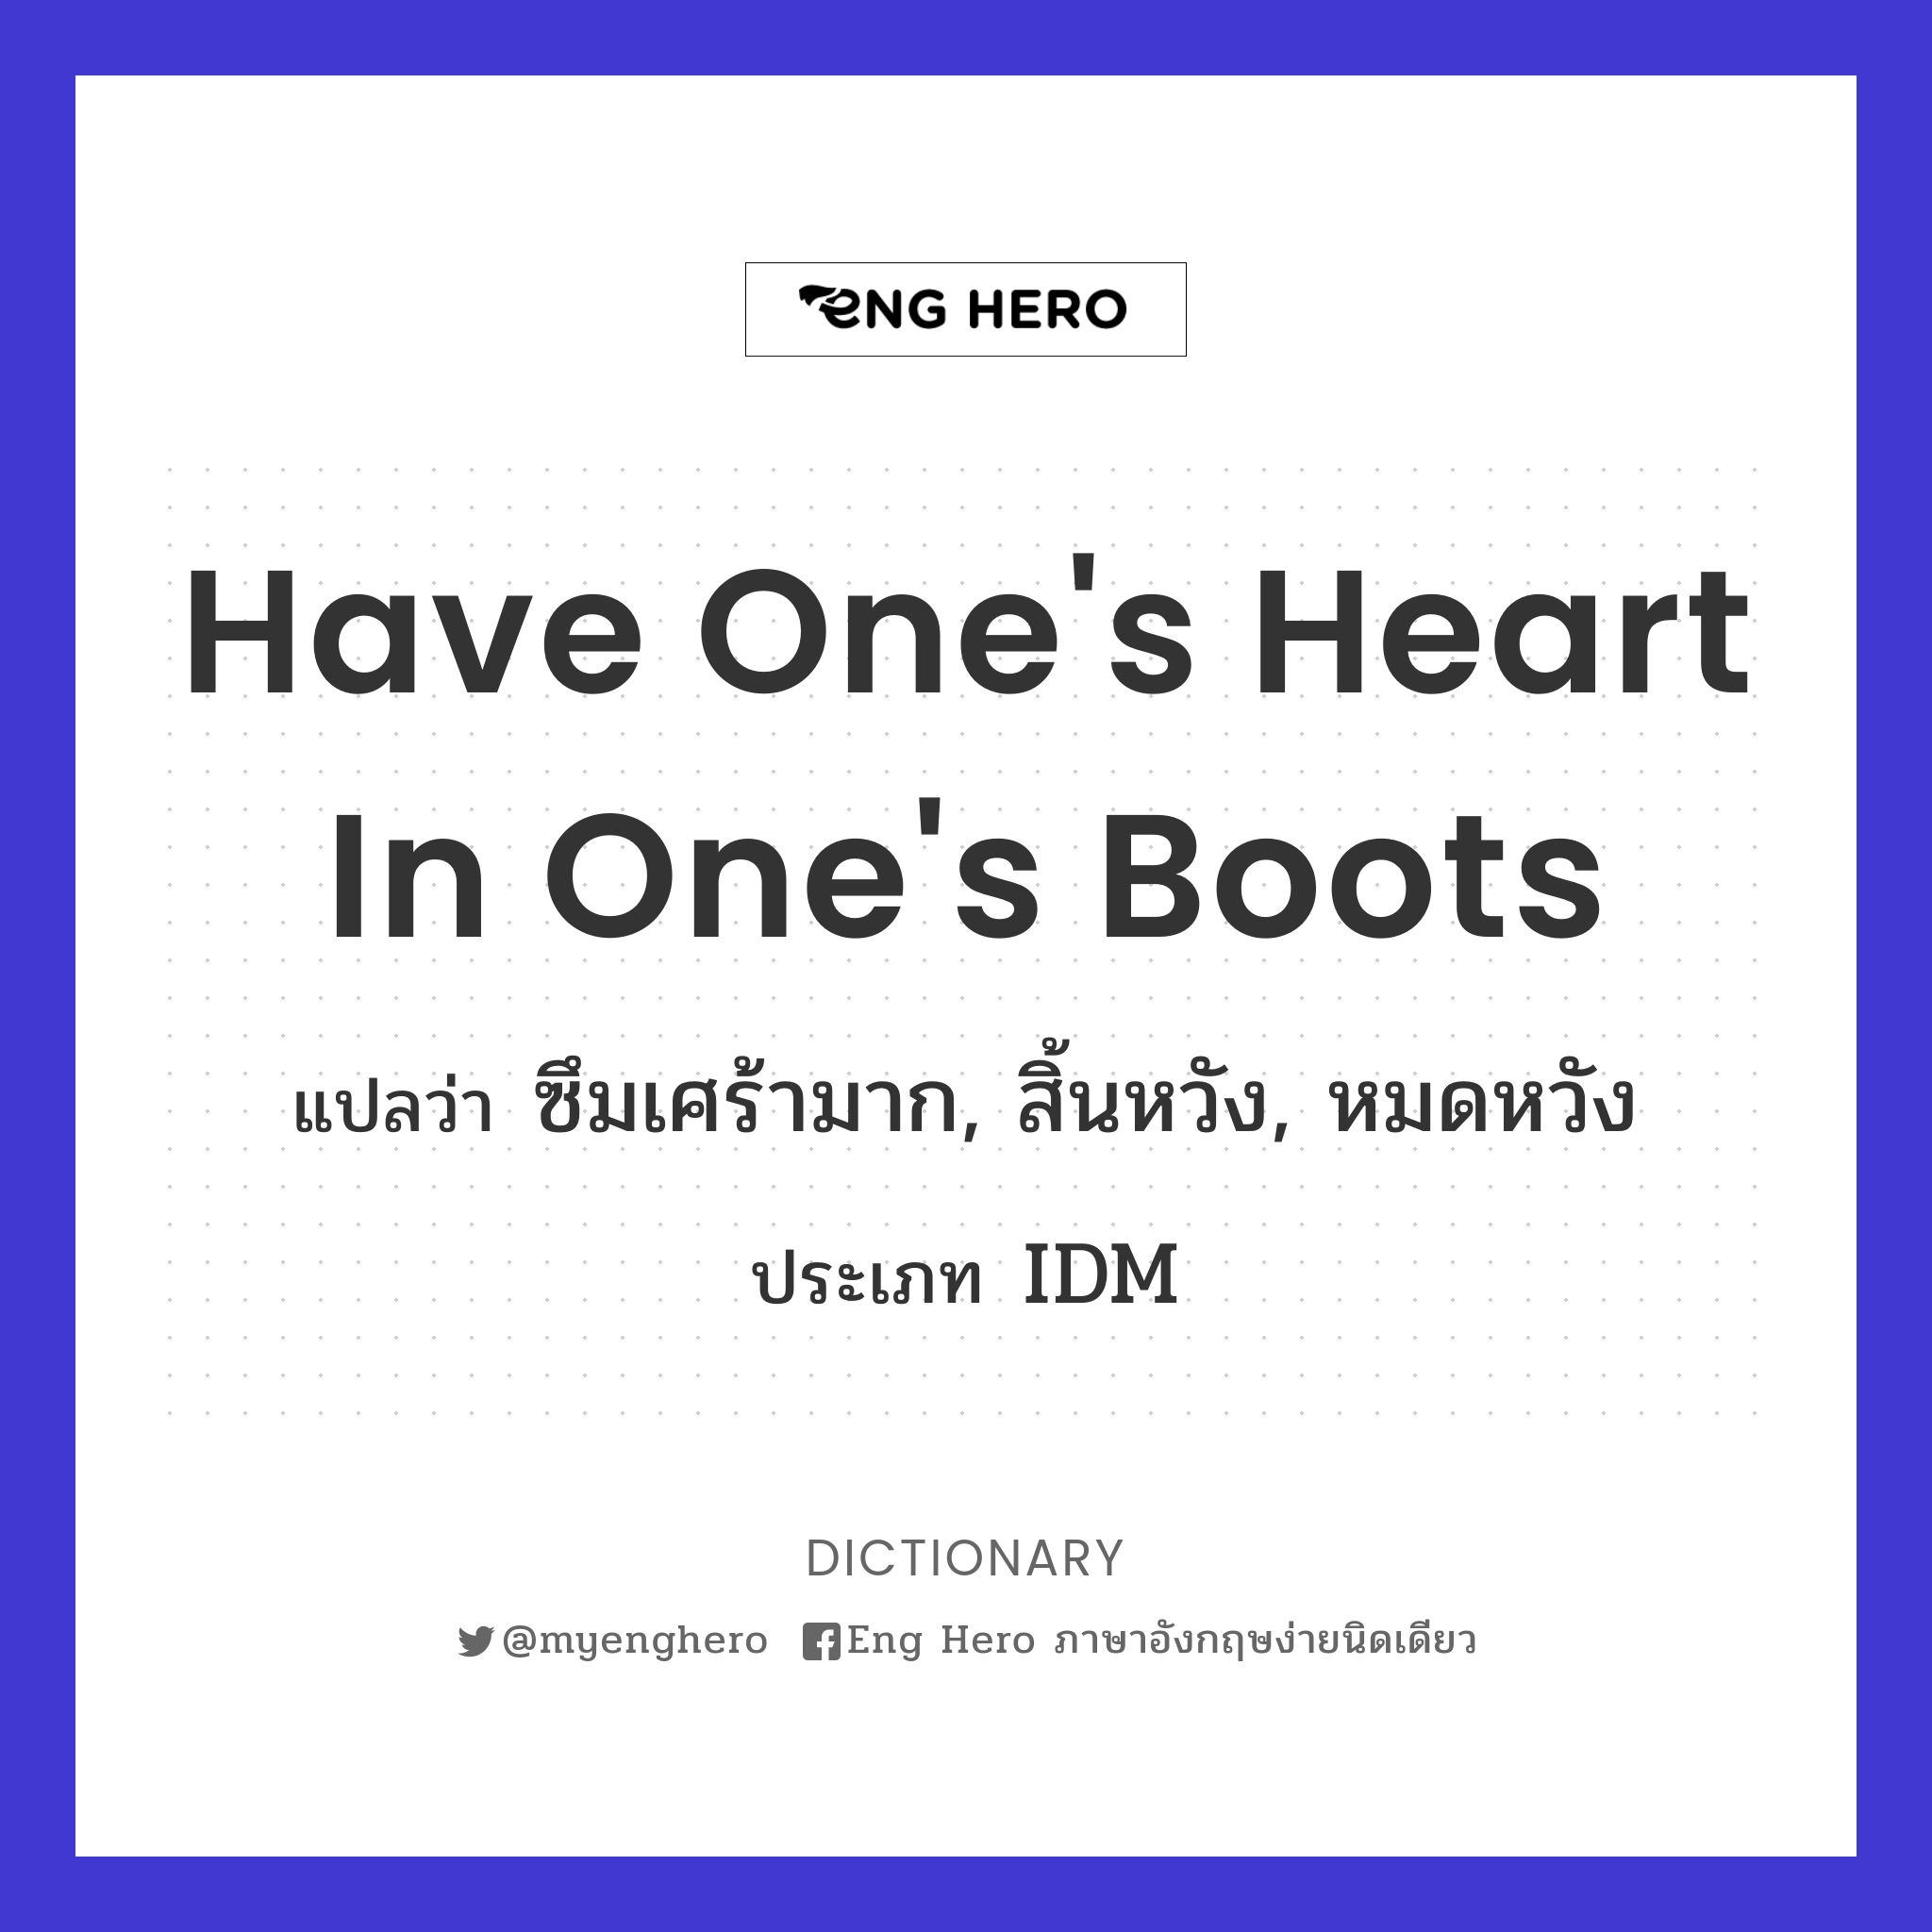 have one's heart in one's boots